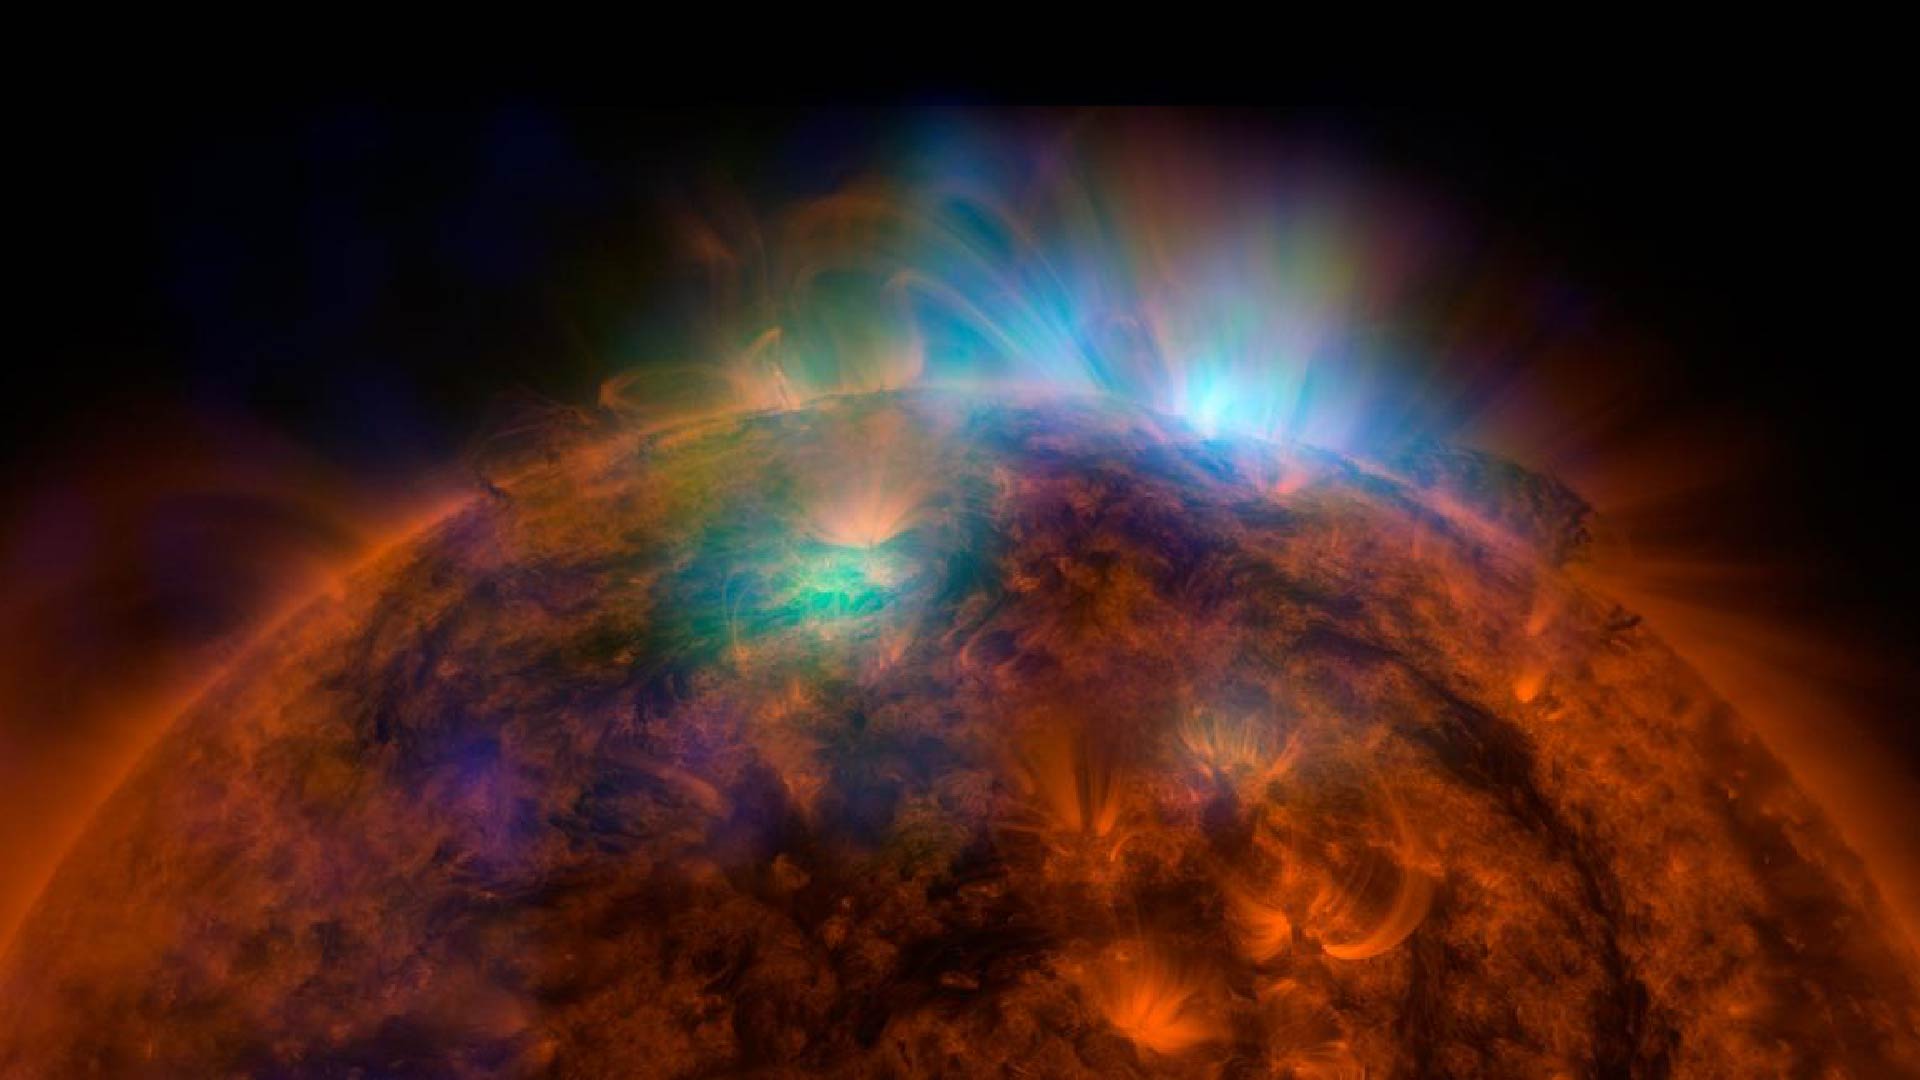 X-rays stream off the sun in this first picture of the sun, overlaid on a picture taken by NASA Solar Dynamics Observatory SDO, taken by NASA NuSTAR. The field of view covers the west limb of the sun.